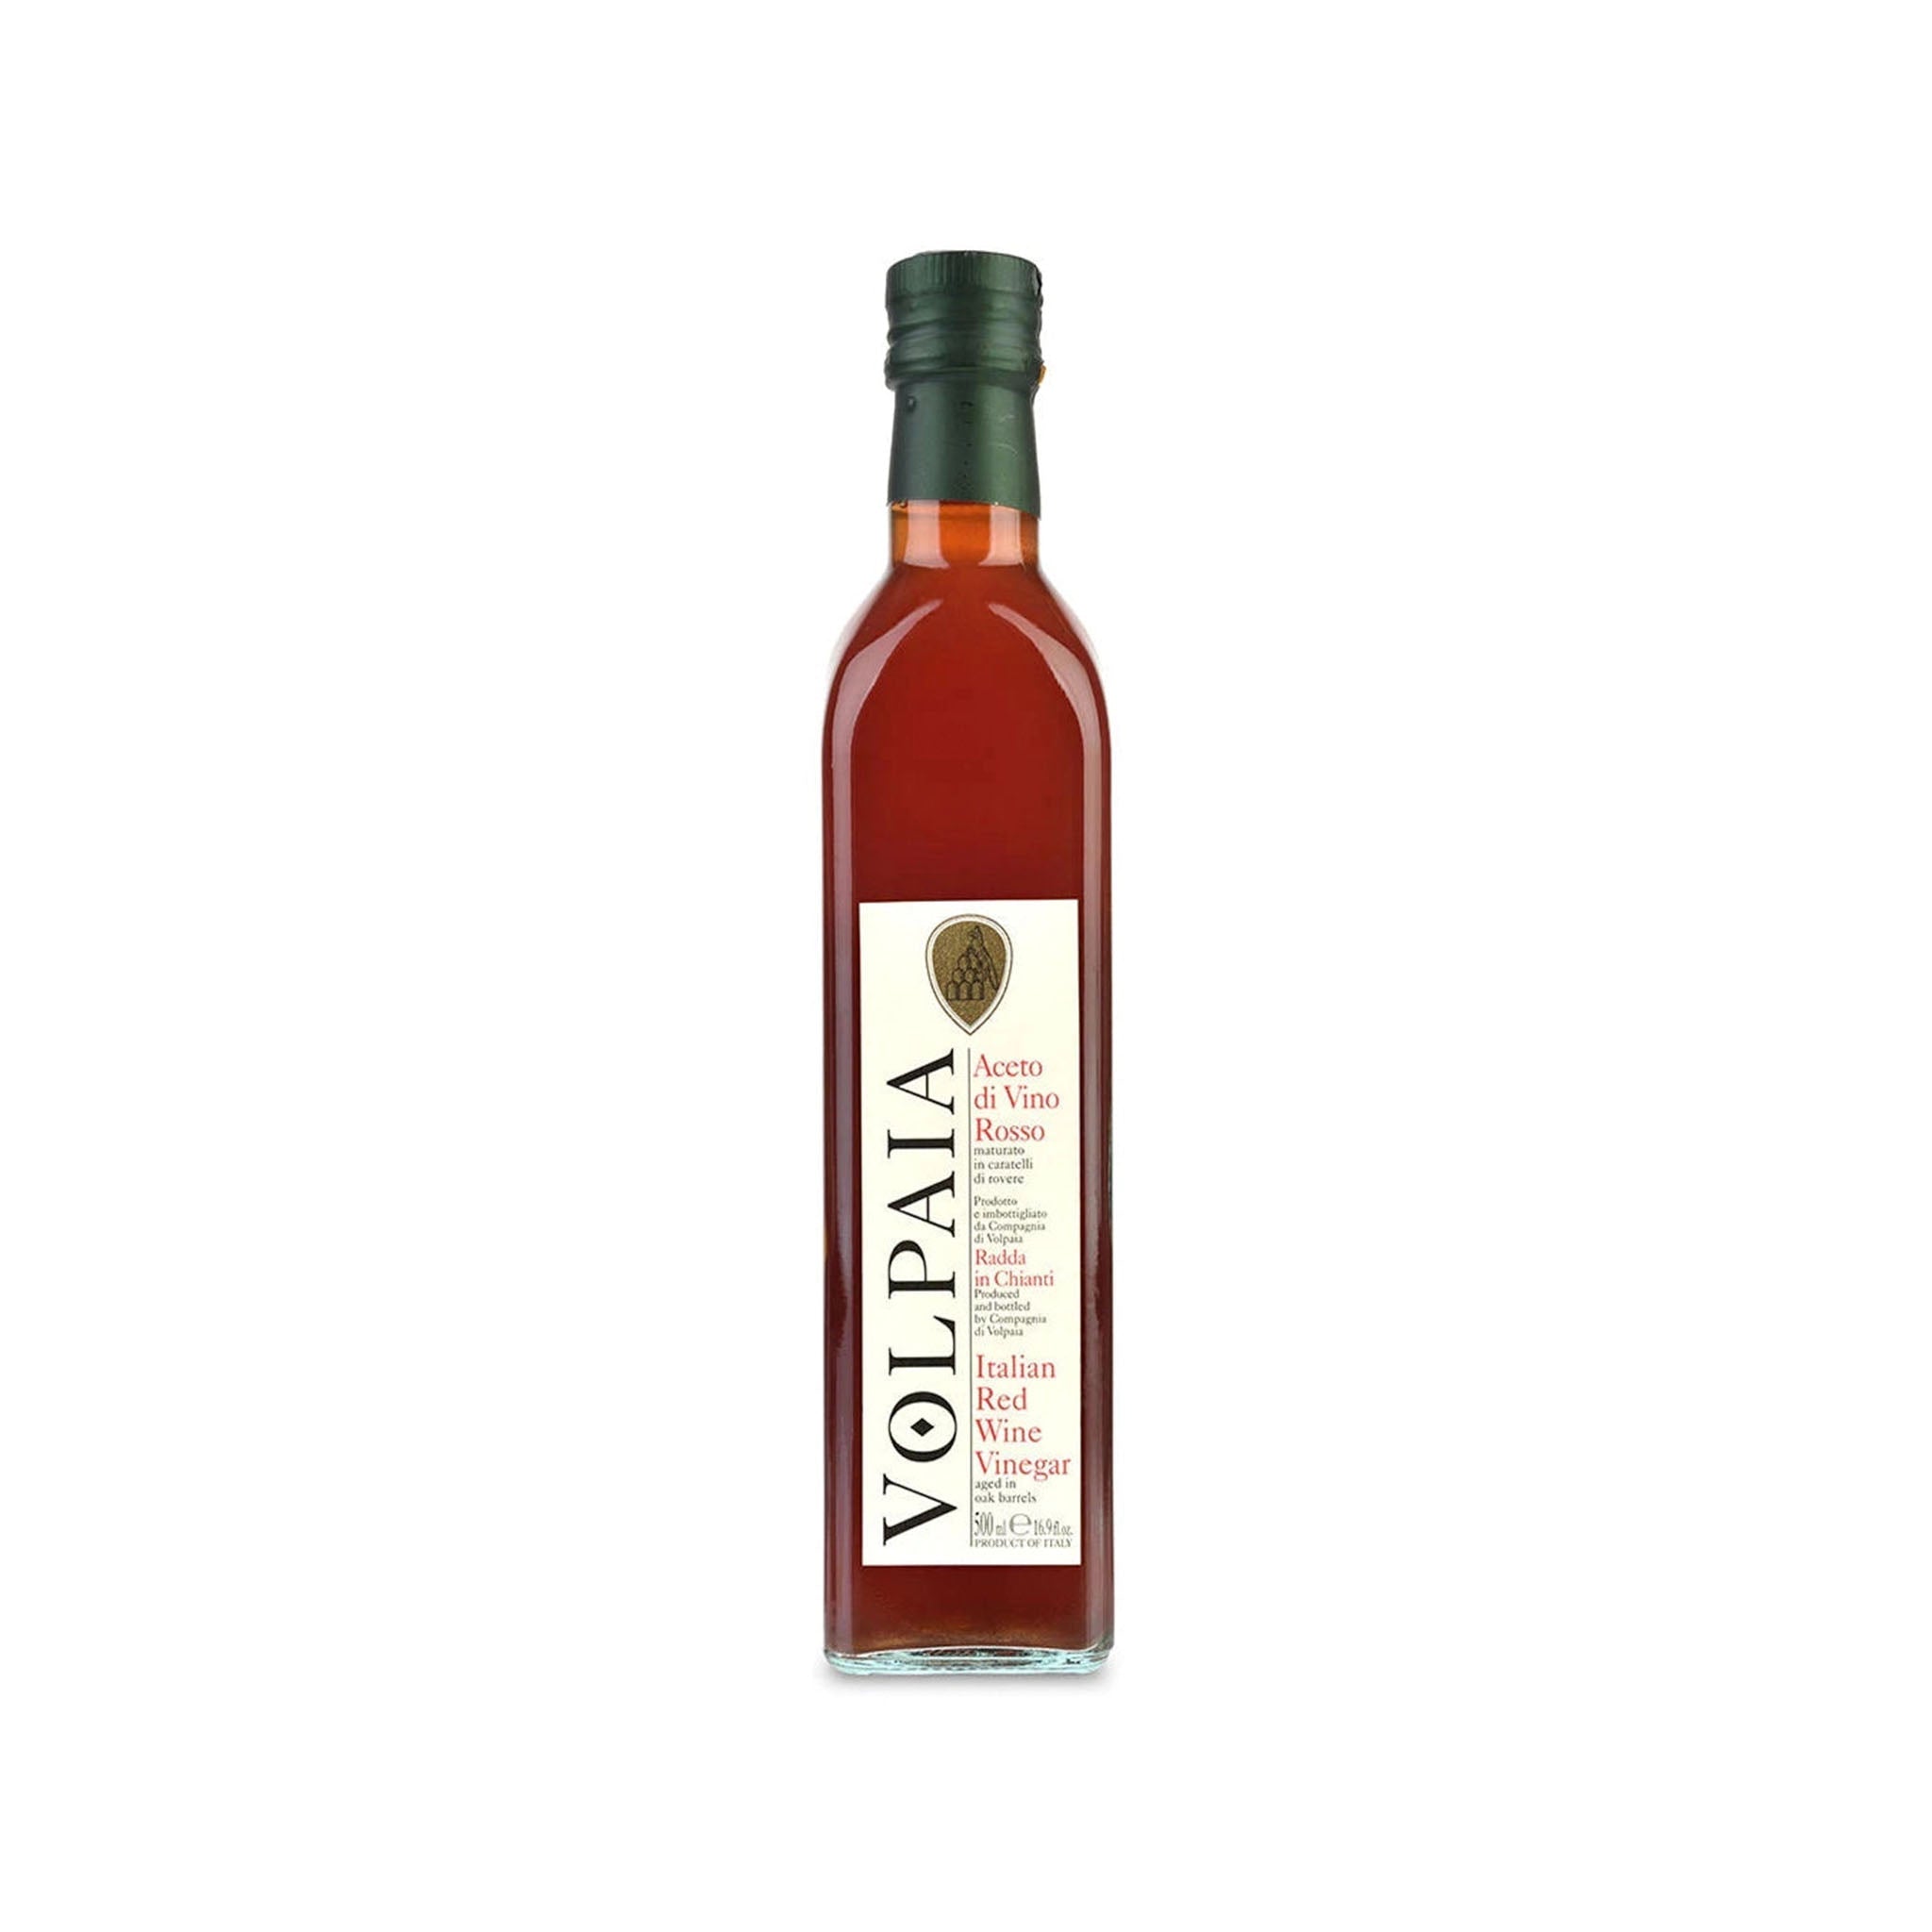 This well-balanced Italian vinegar will elevate the taste of your favorite salads and meats.